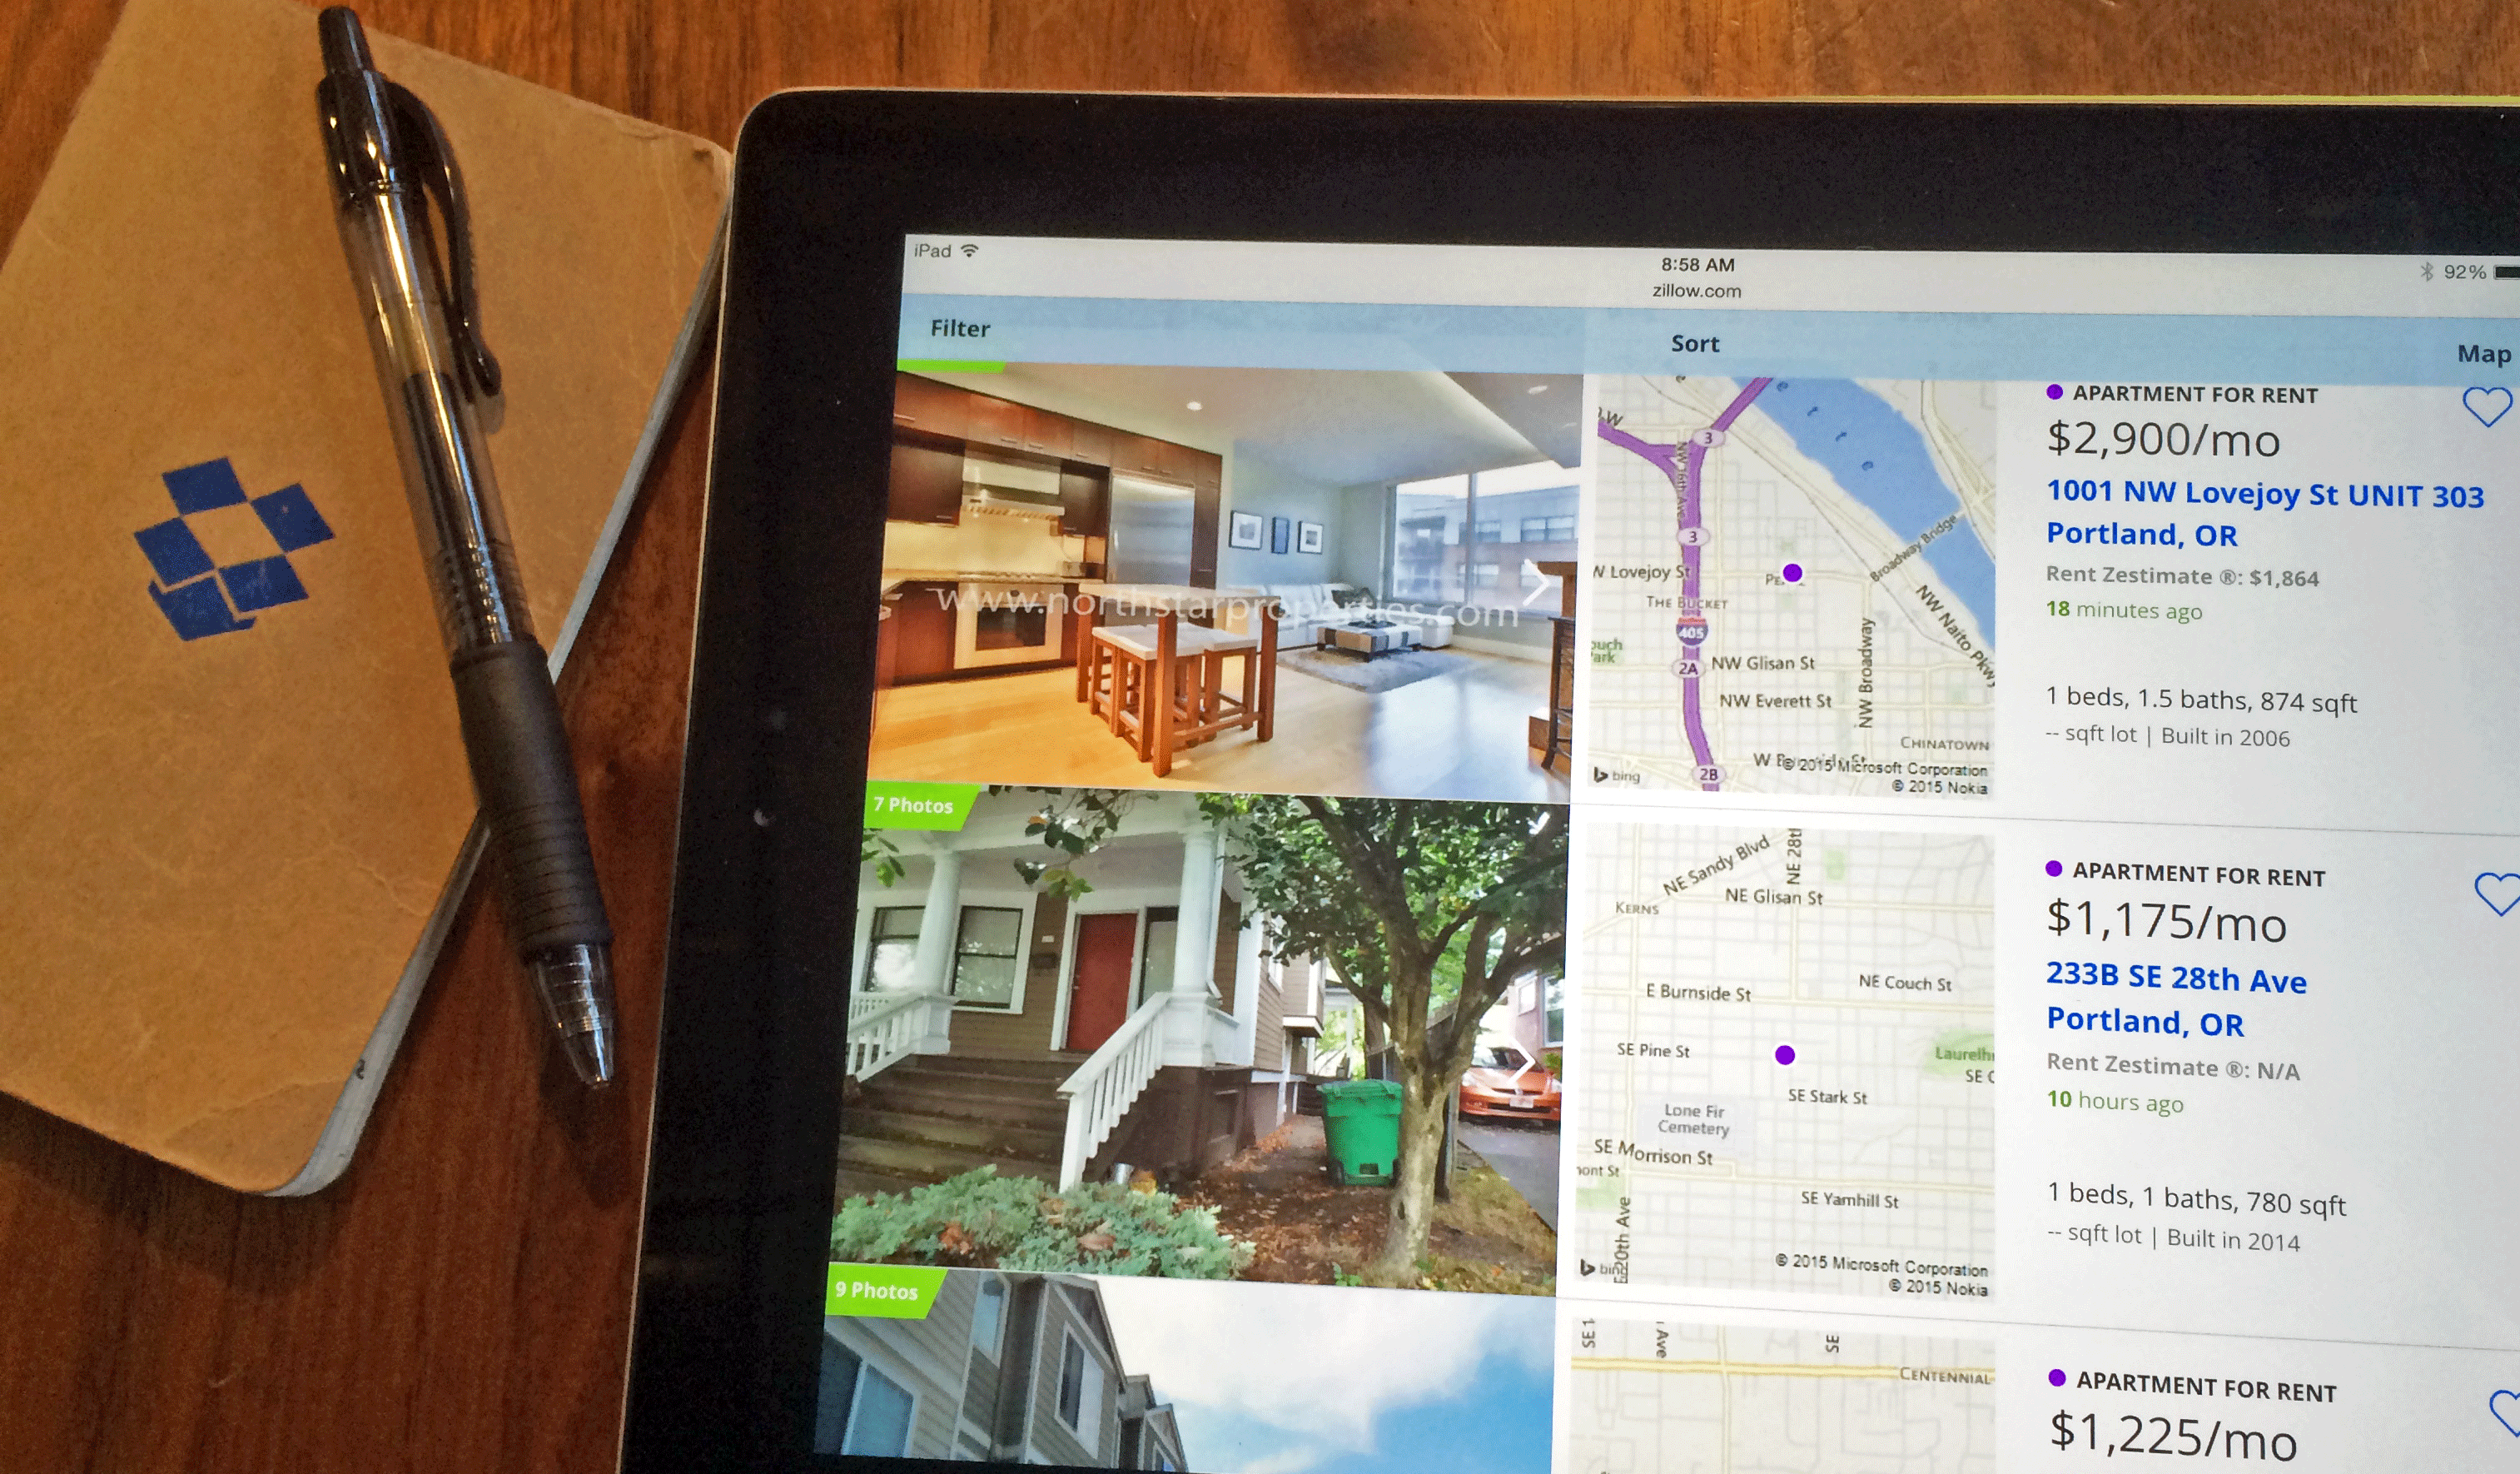 Apartment Hunting or House Hunting with Dropbox